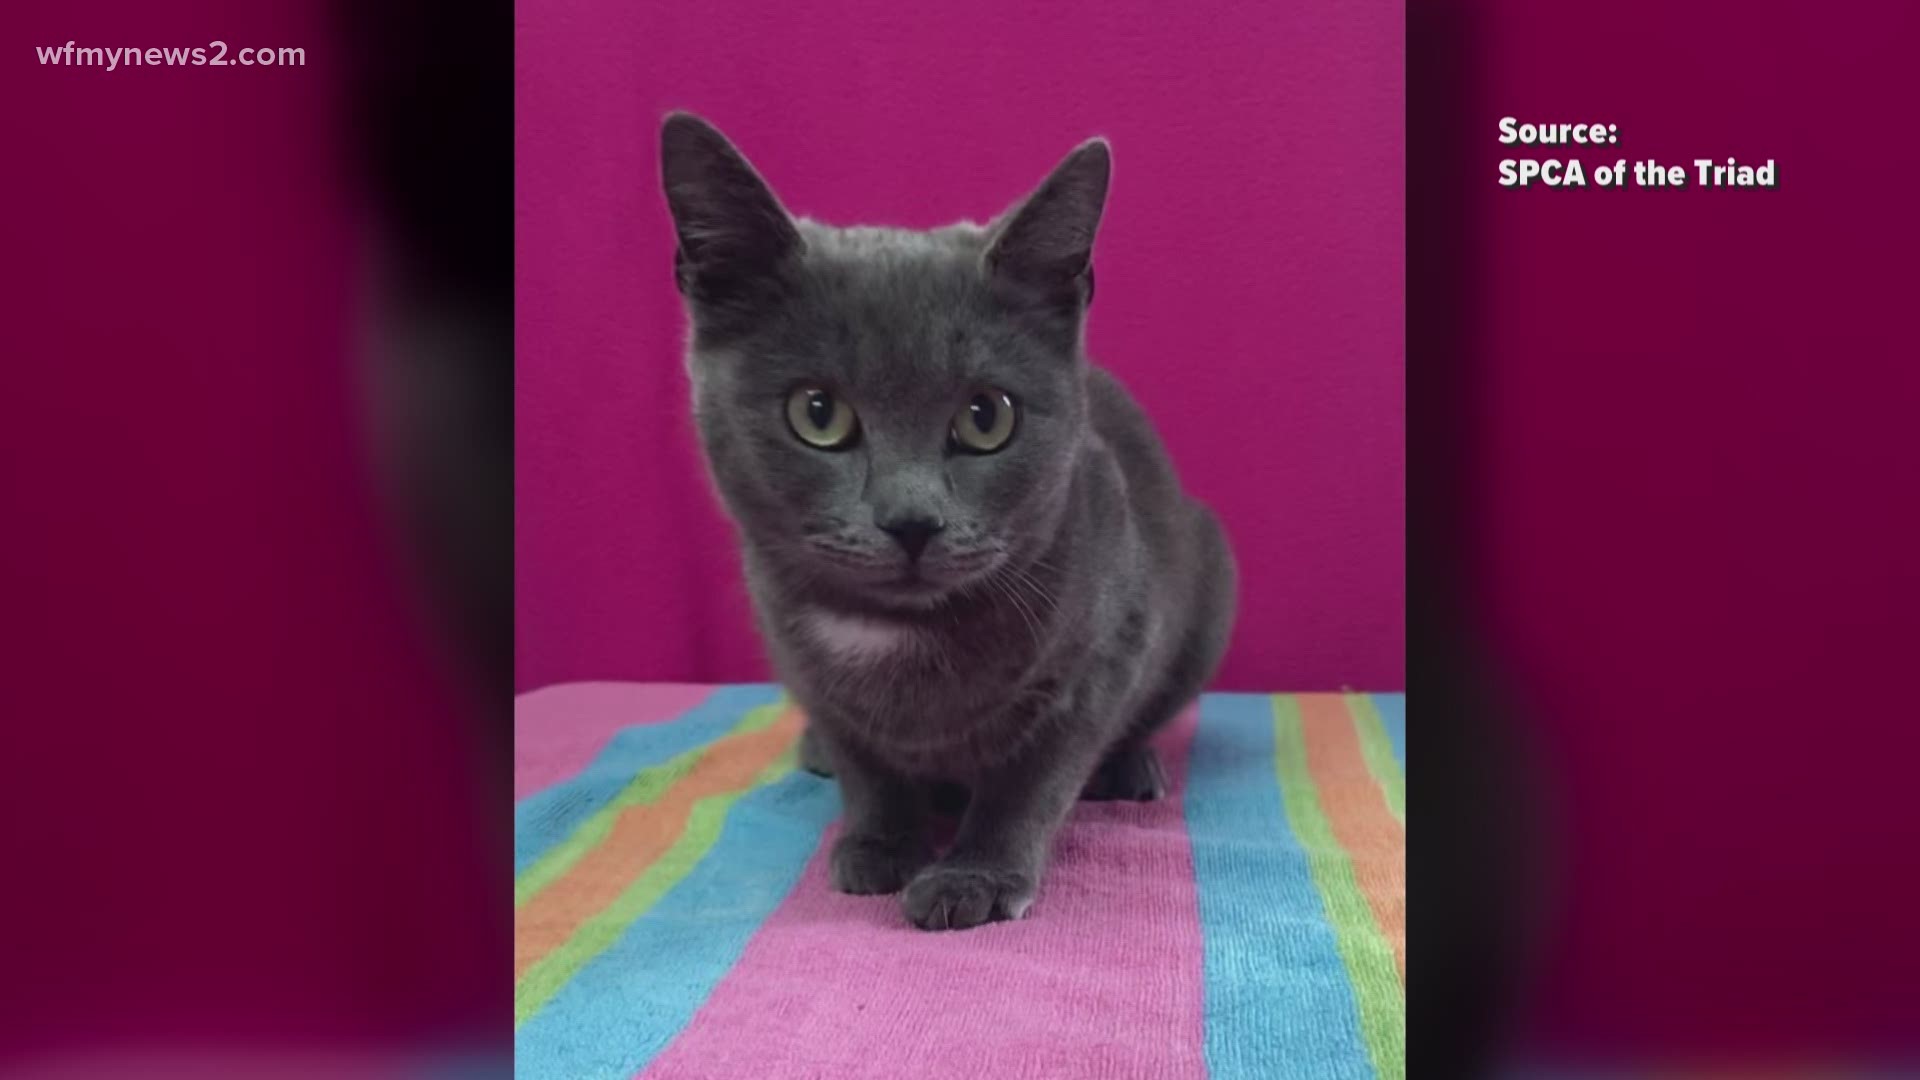 This cuddly kitten will warm your heart and home!